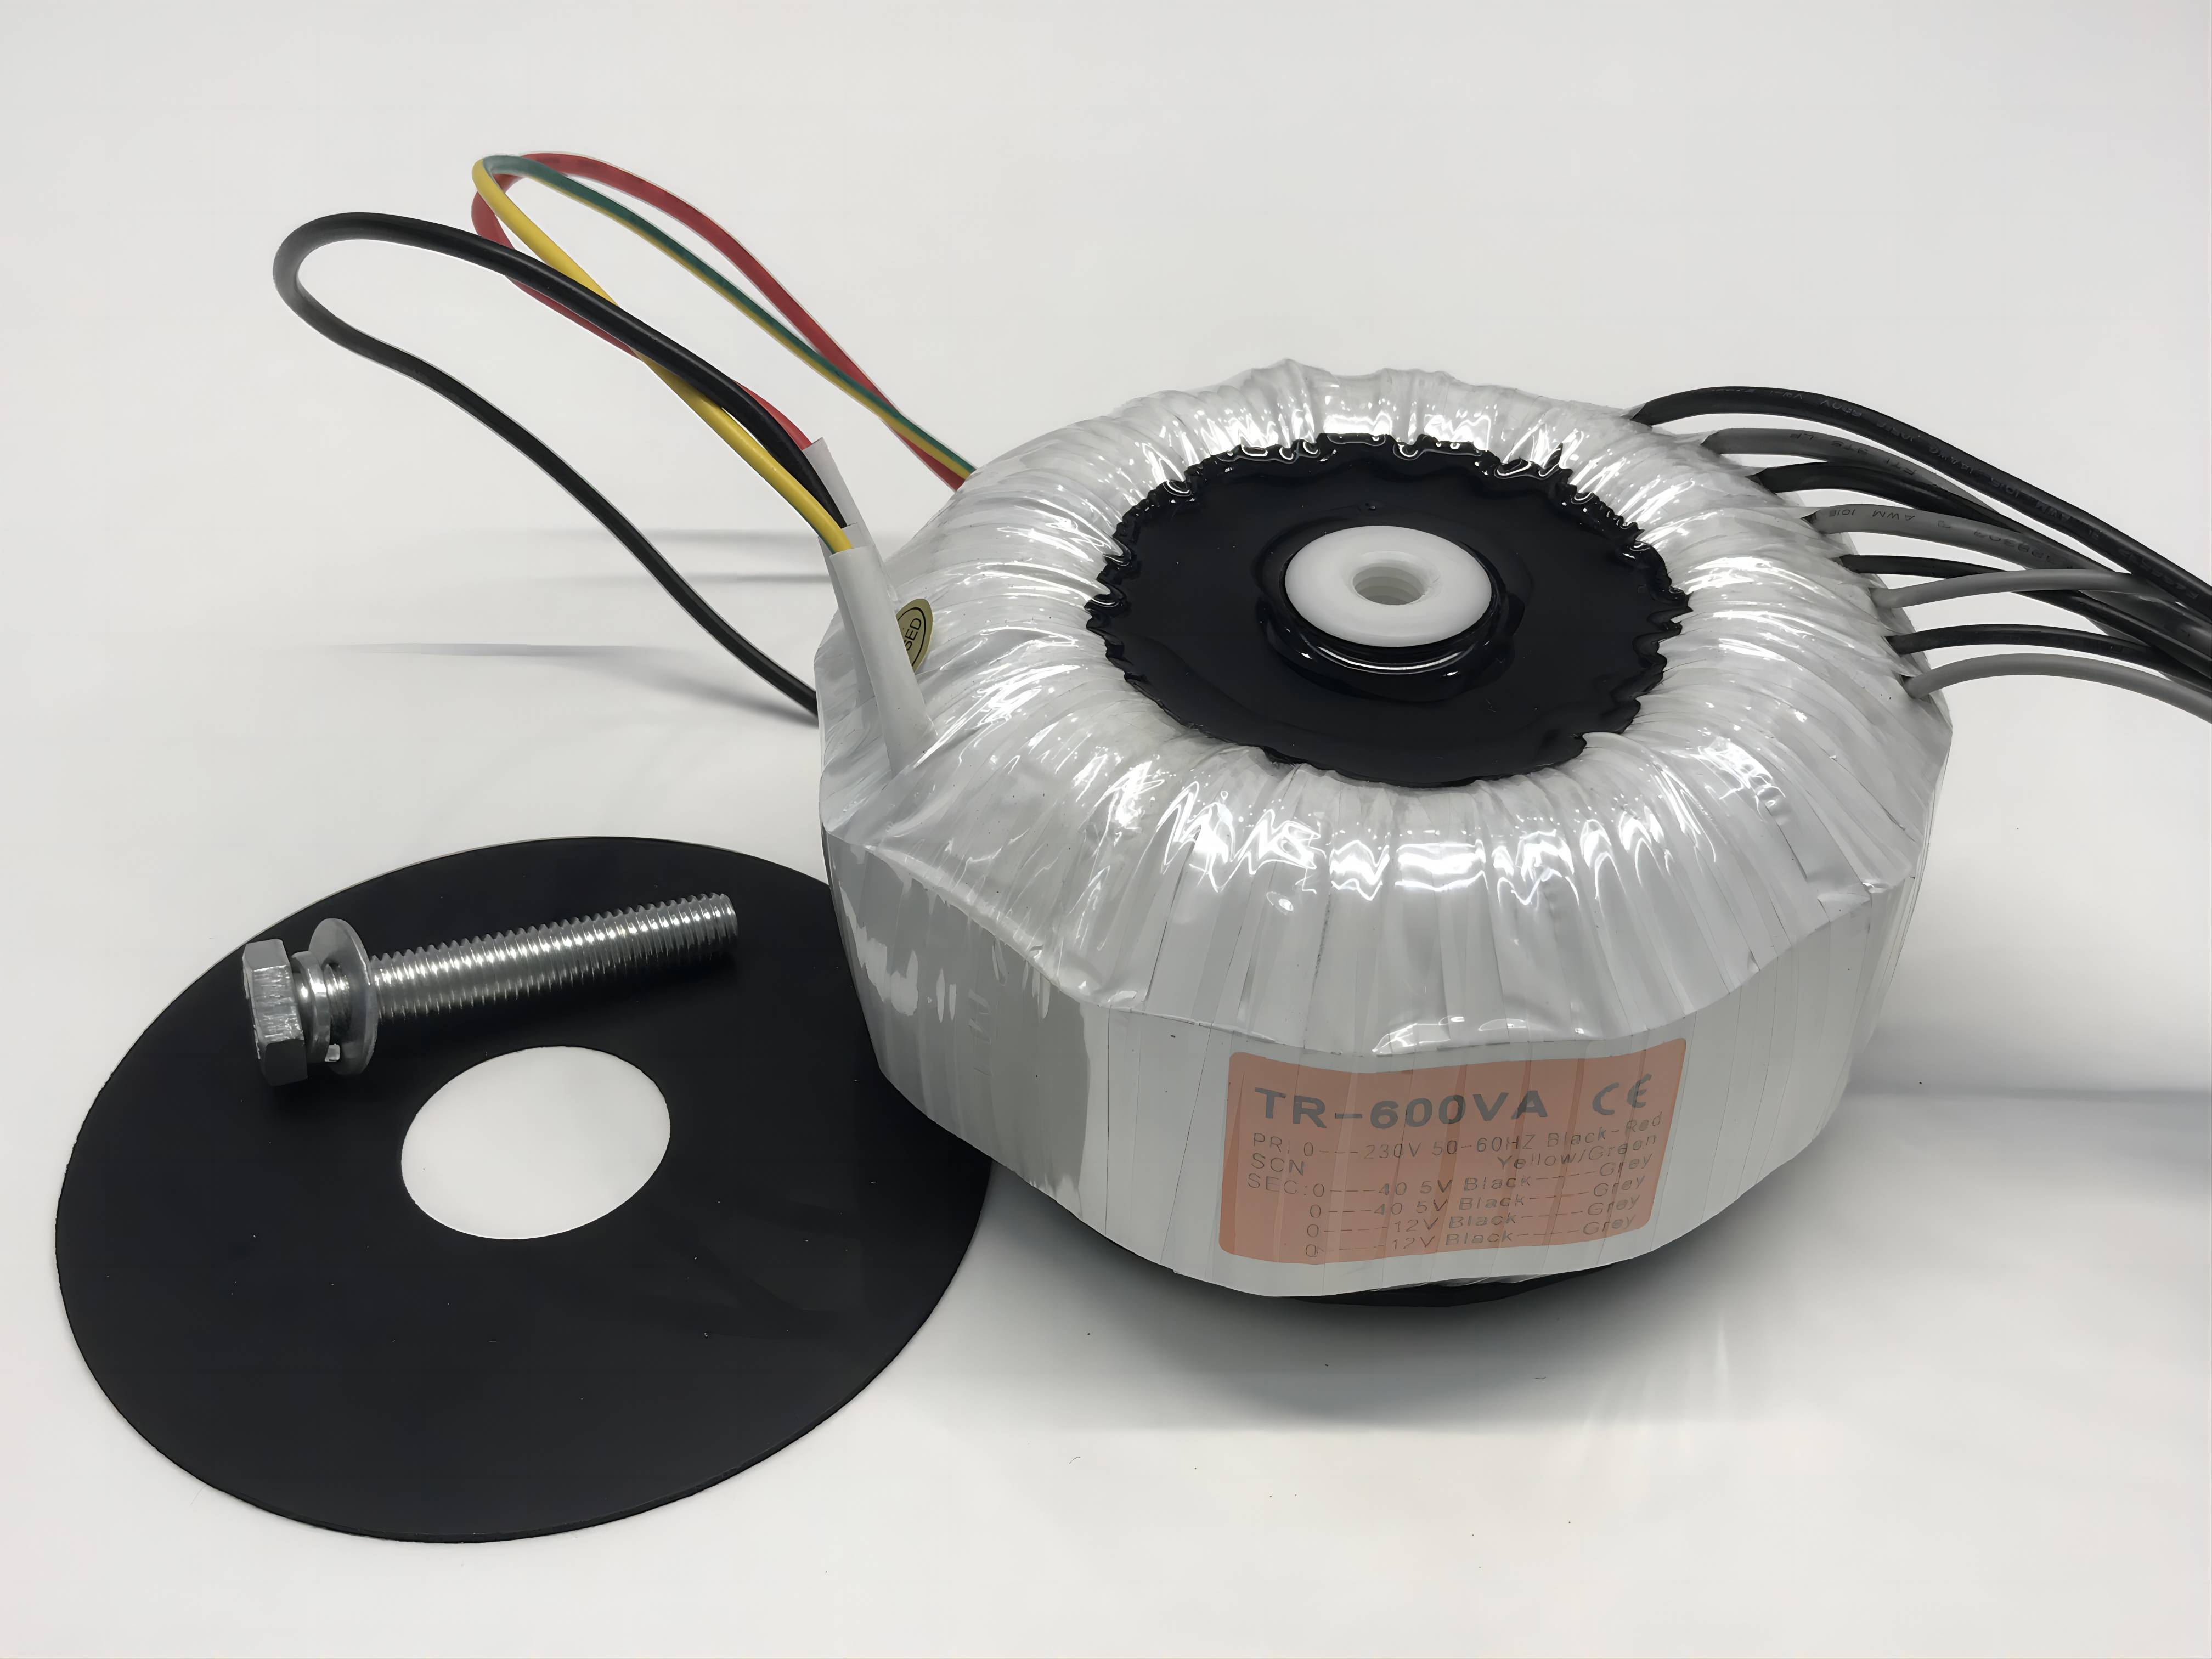 Why Are Toroidal Transformers Better For Audio?